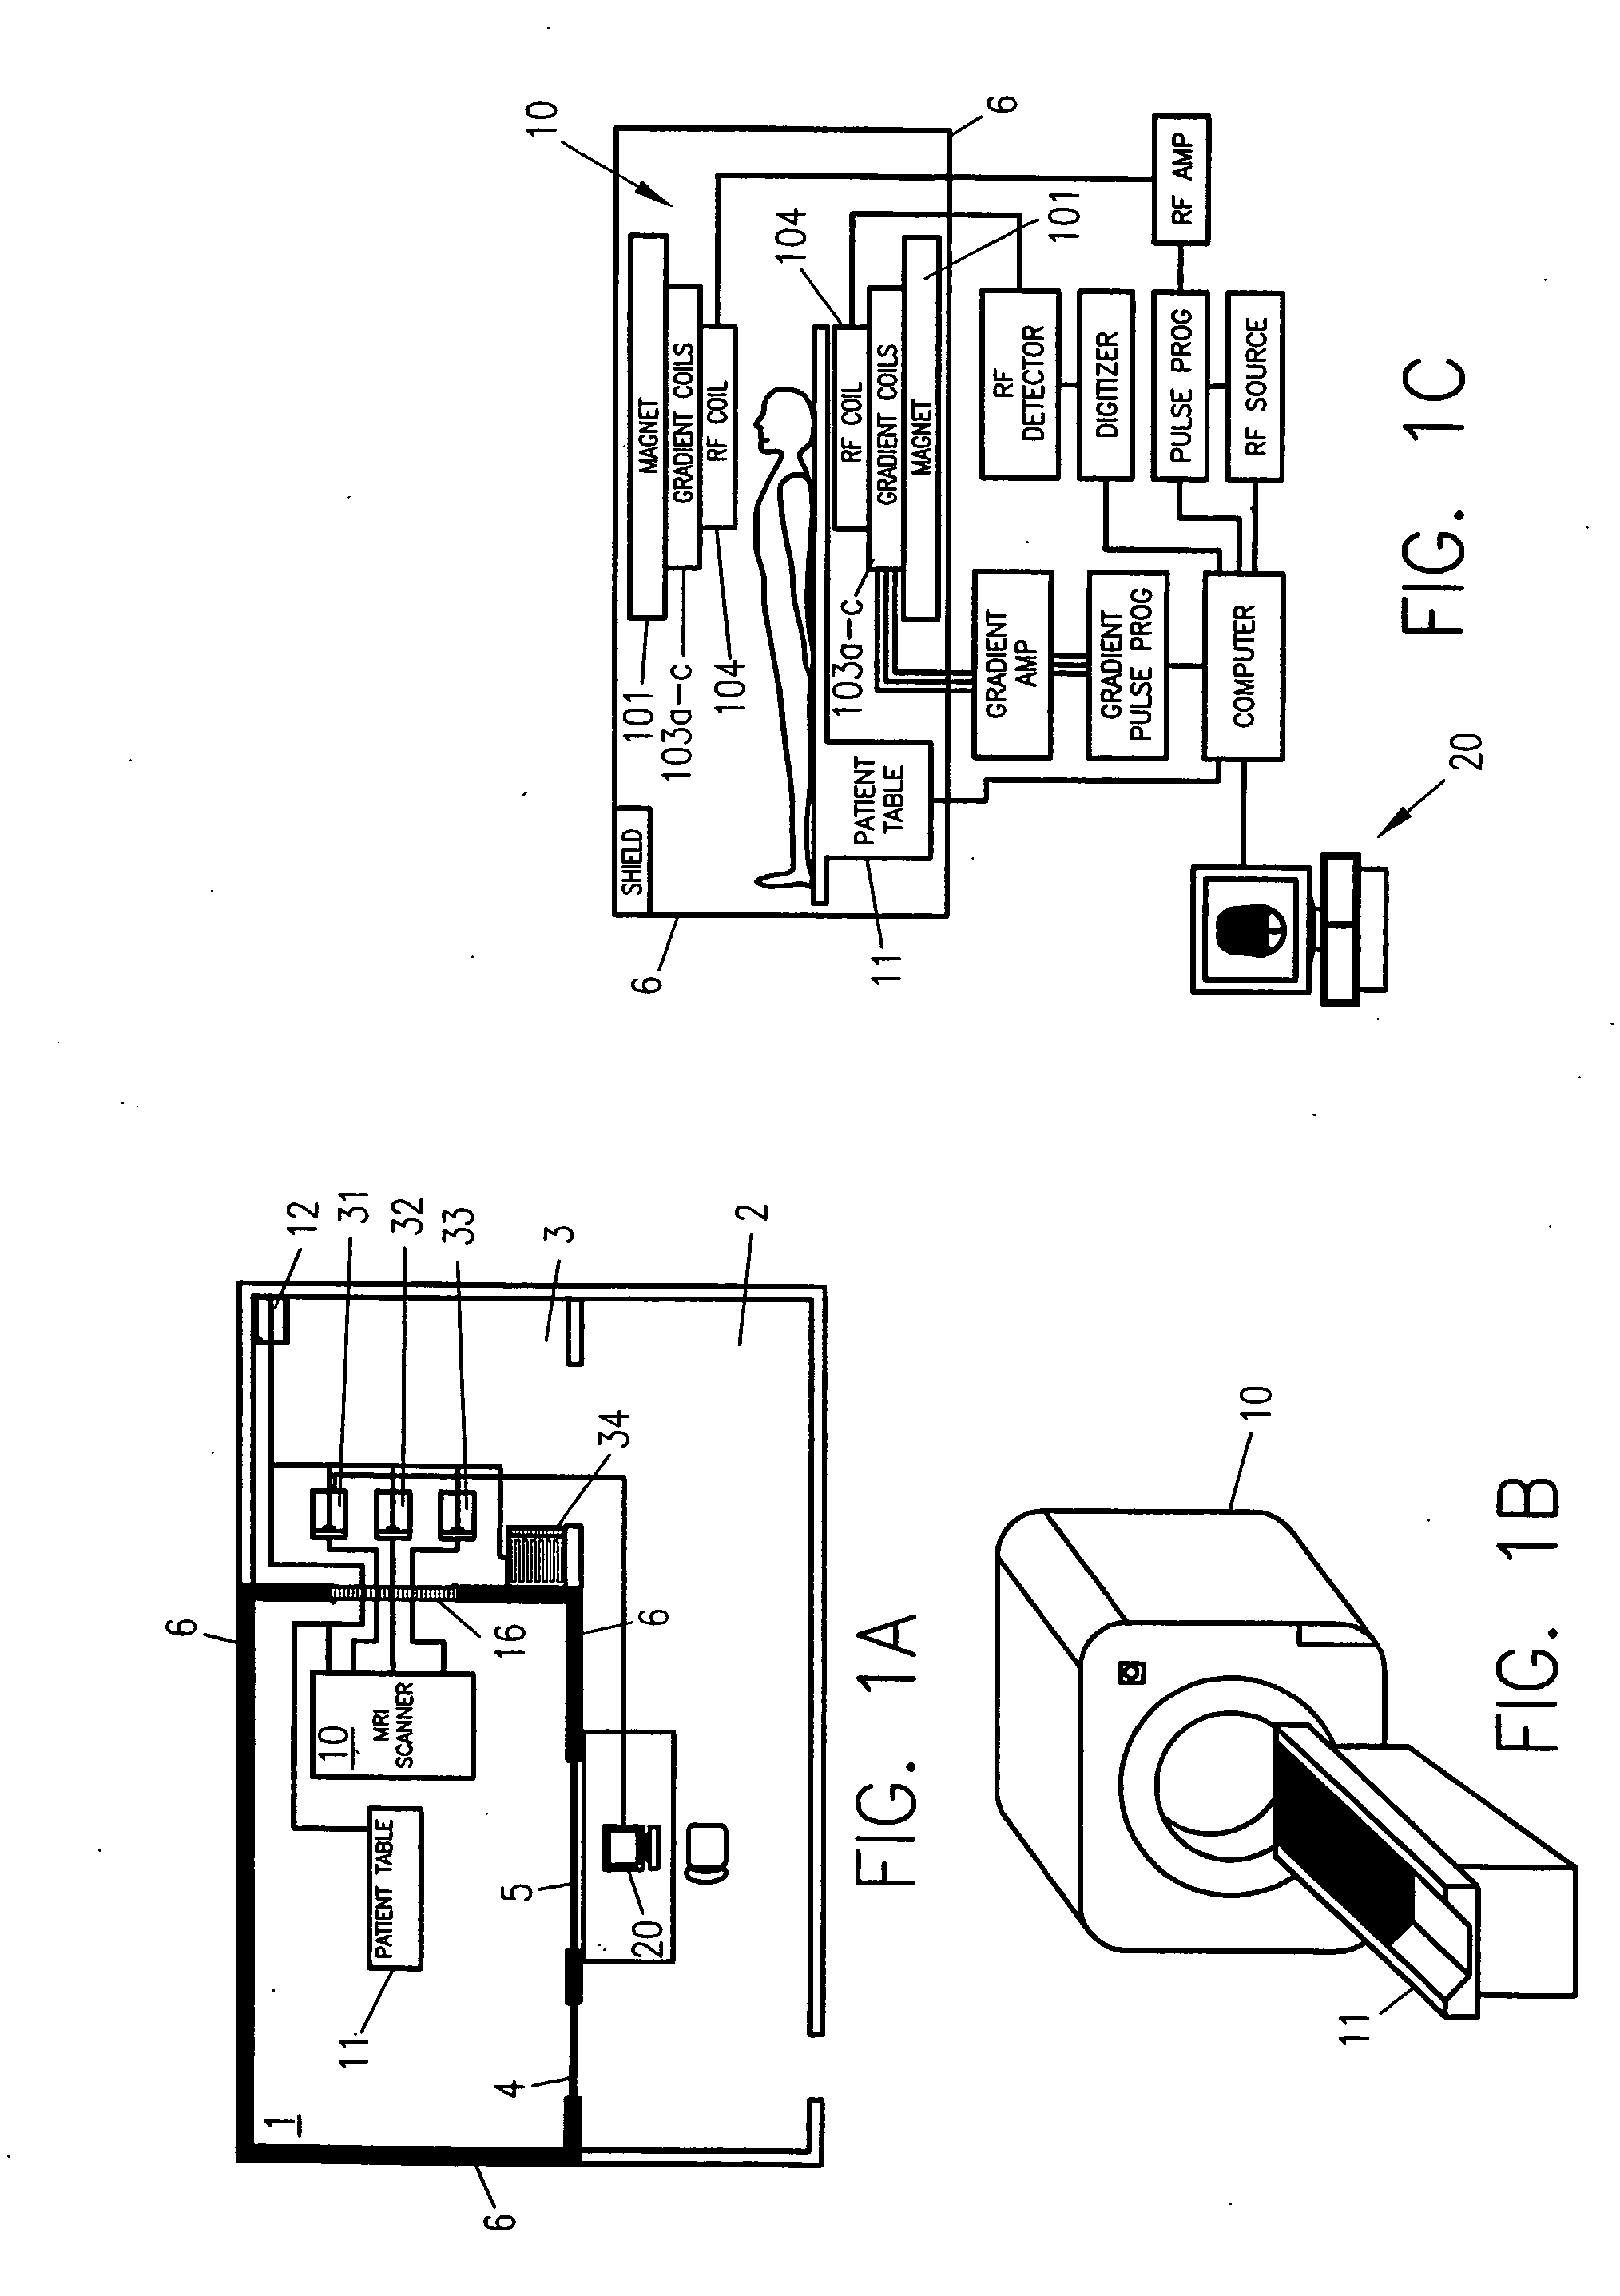 Wireless patient monitoring device for magnetic resonance imaging